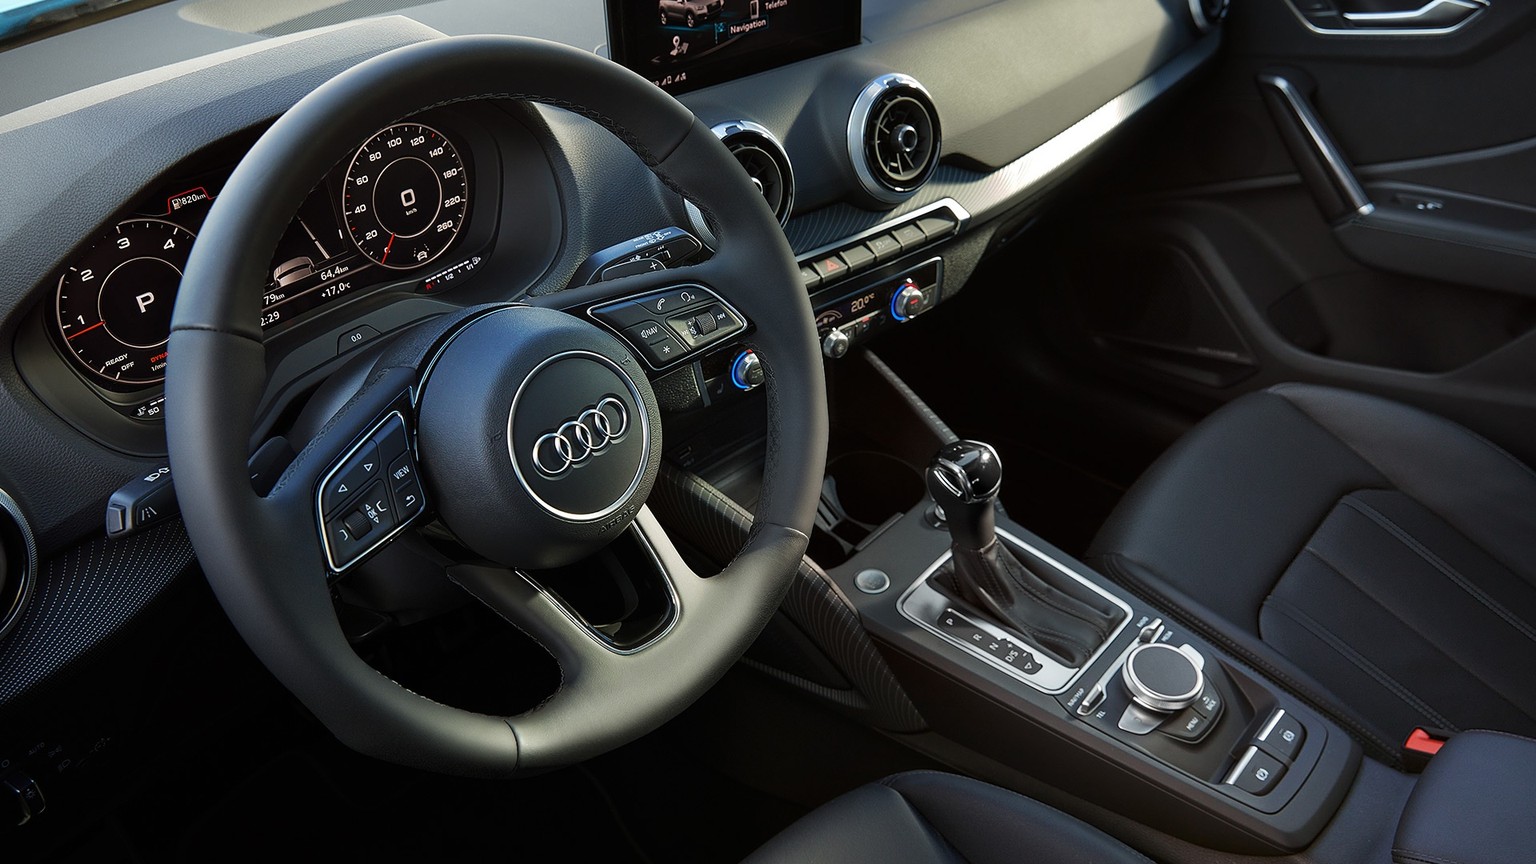 Interior dashboard view of the Audi Q2